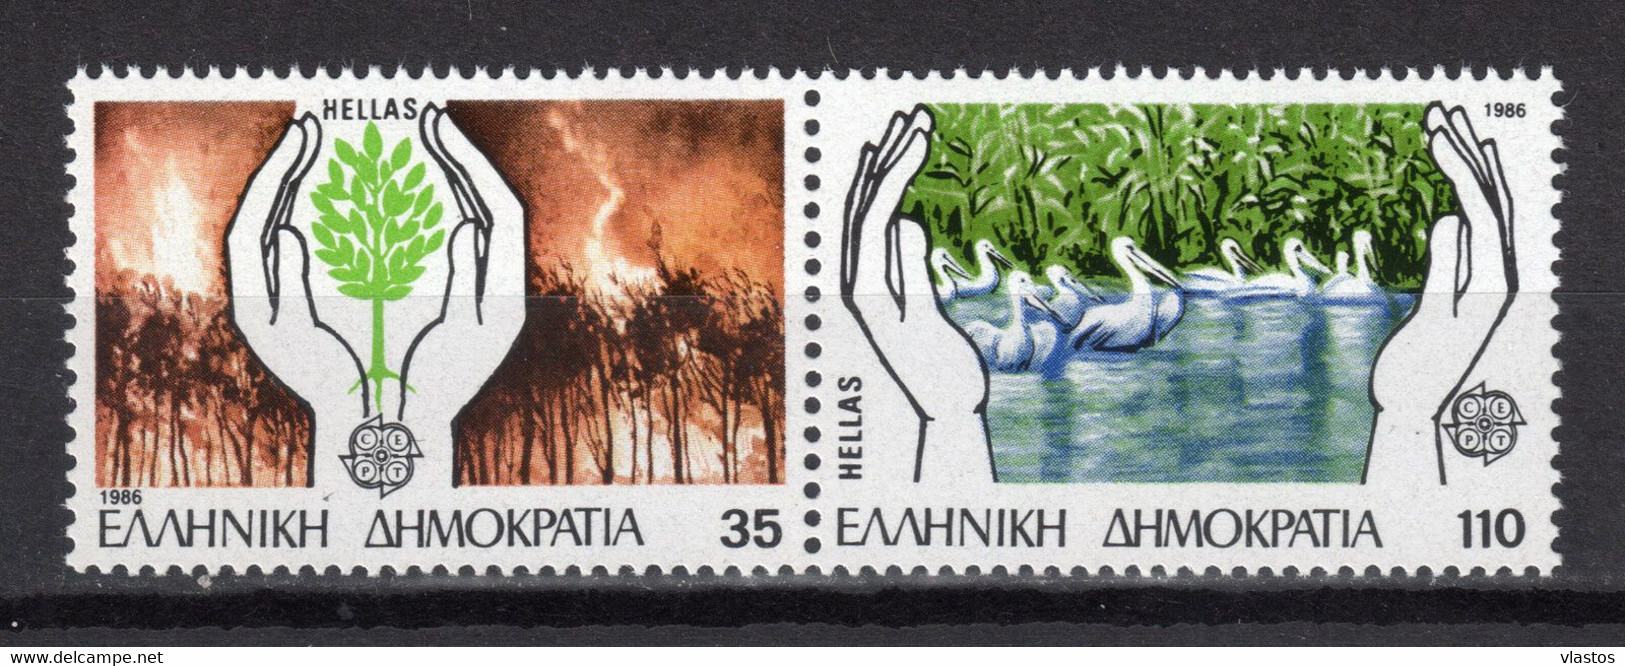 GREECE 1986 COMPLETE YEAR - PERFORATED STAMPS MNH - Années Complètes